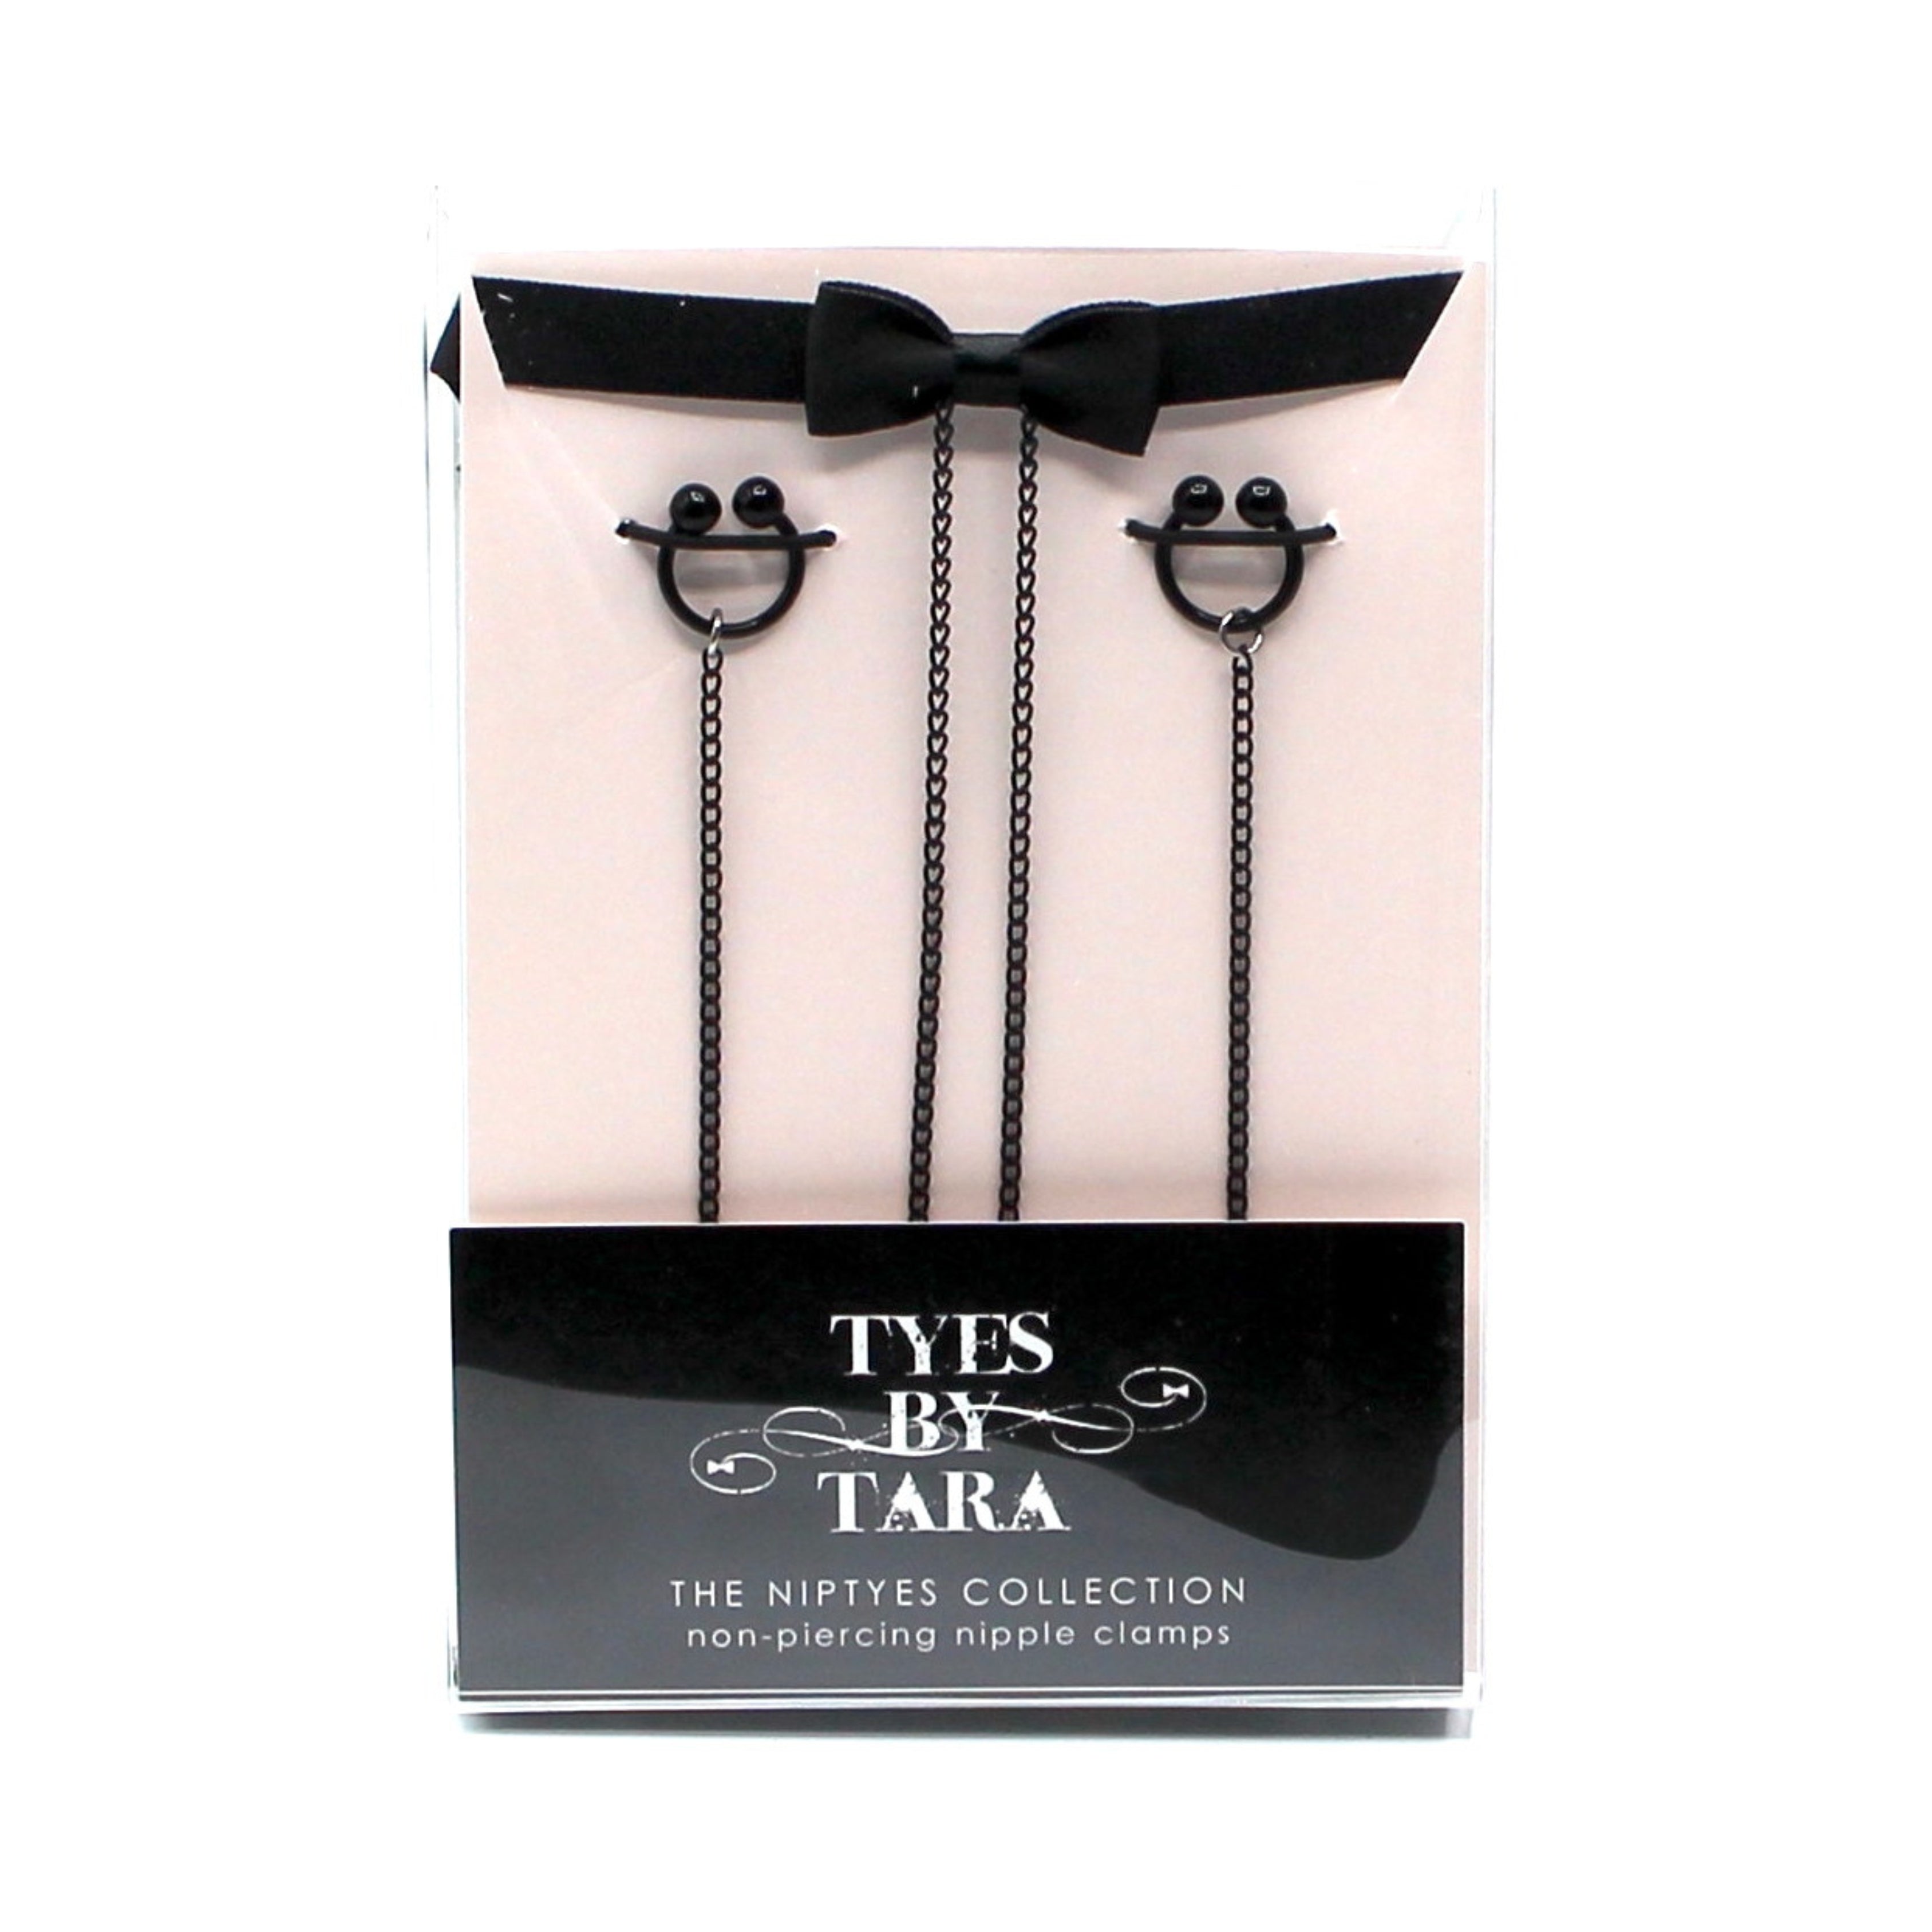 Heartbreaker Black Non-Piercing Nipple Clamps in Pink and Black Box